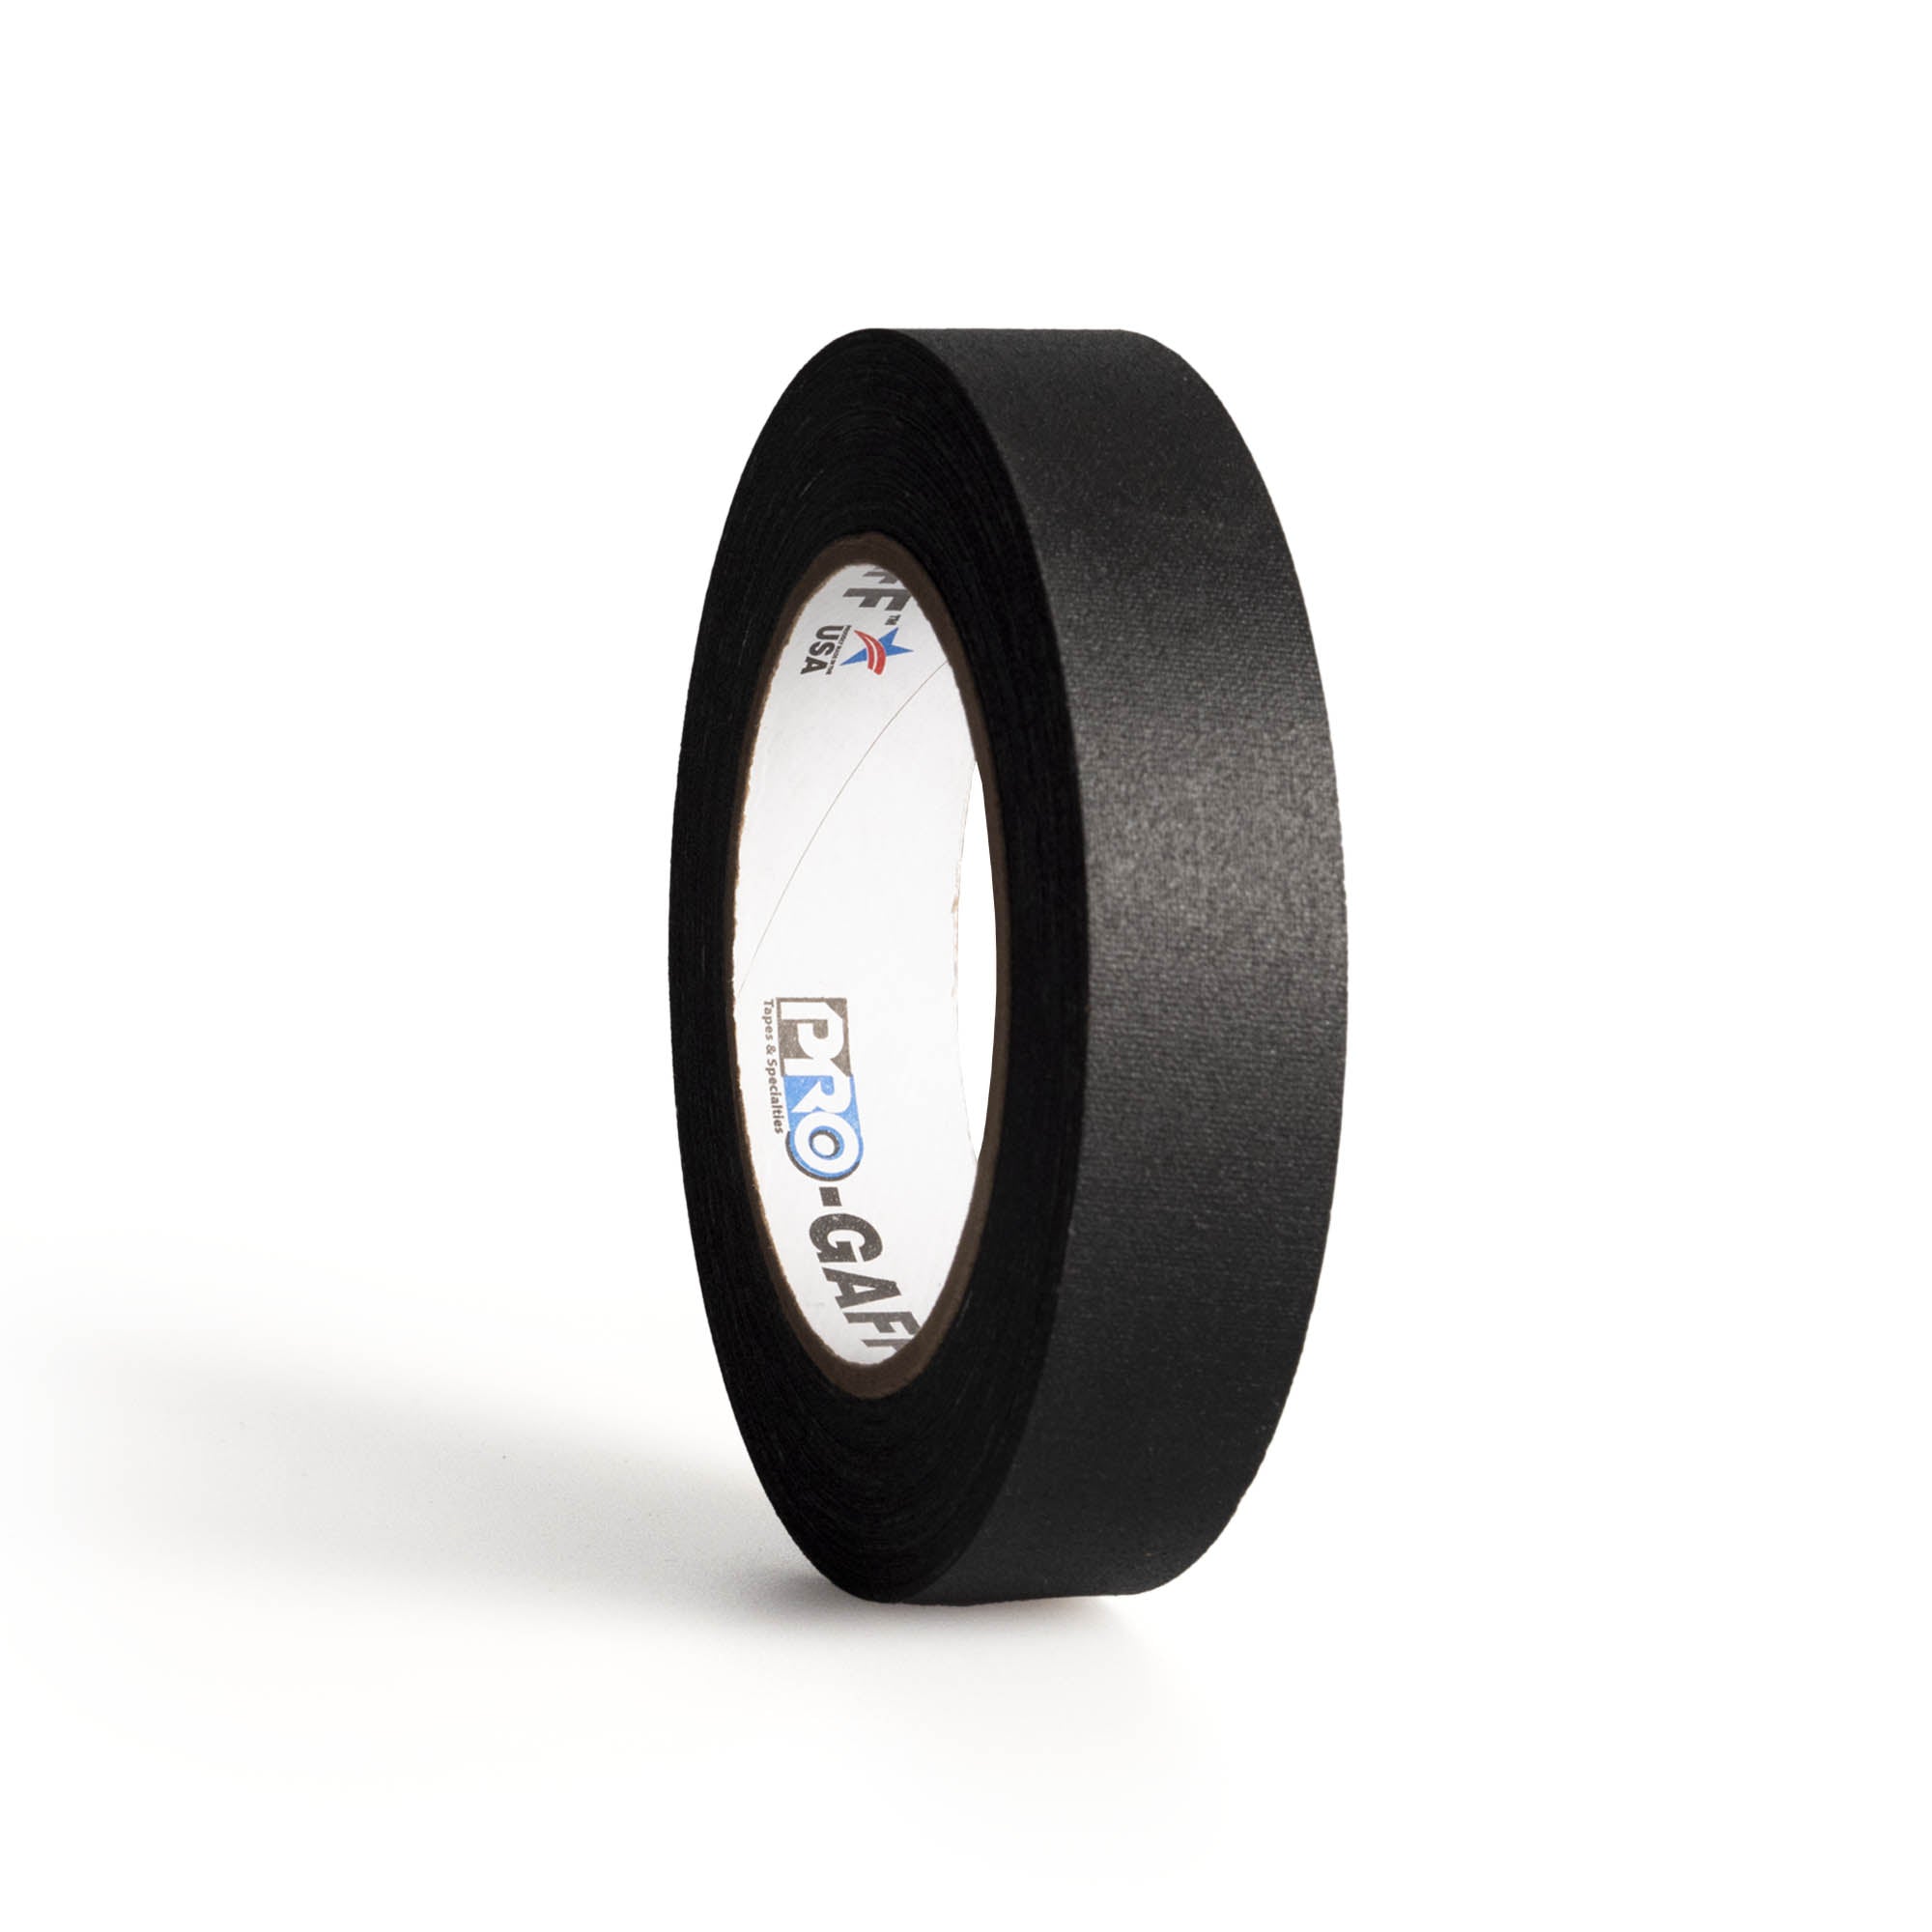 25m roll of pro gaff fabric adhesive tape in black standing up